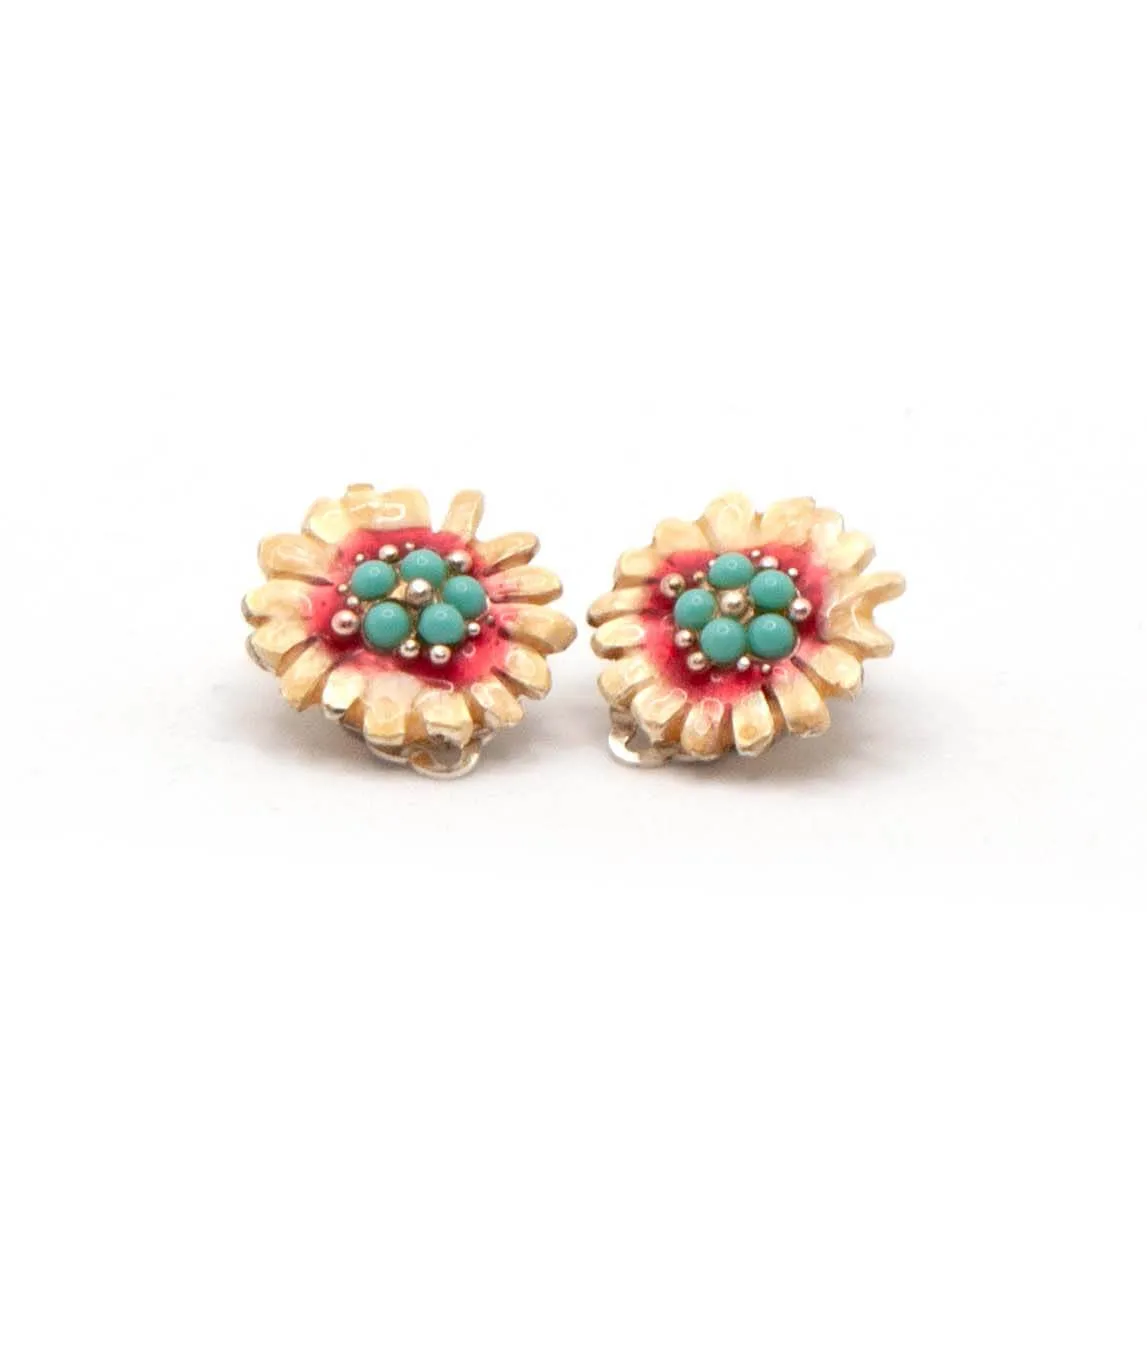 Christian Lacroix yellow and red enamel earrings with turquoise beads